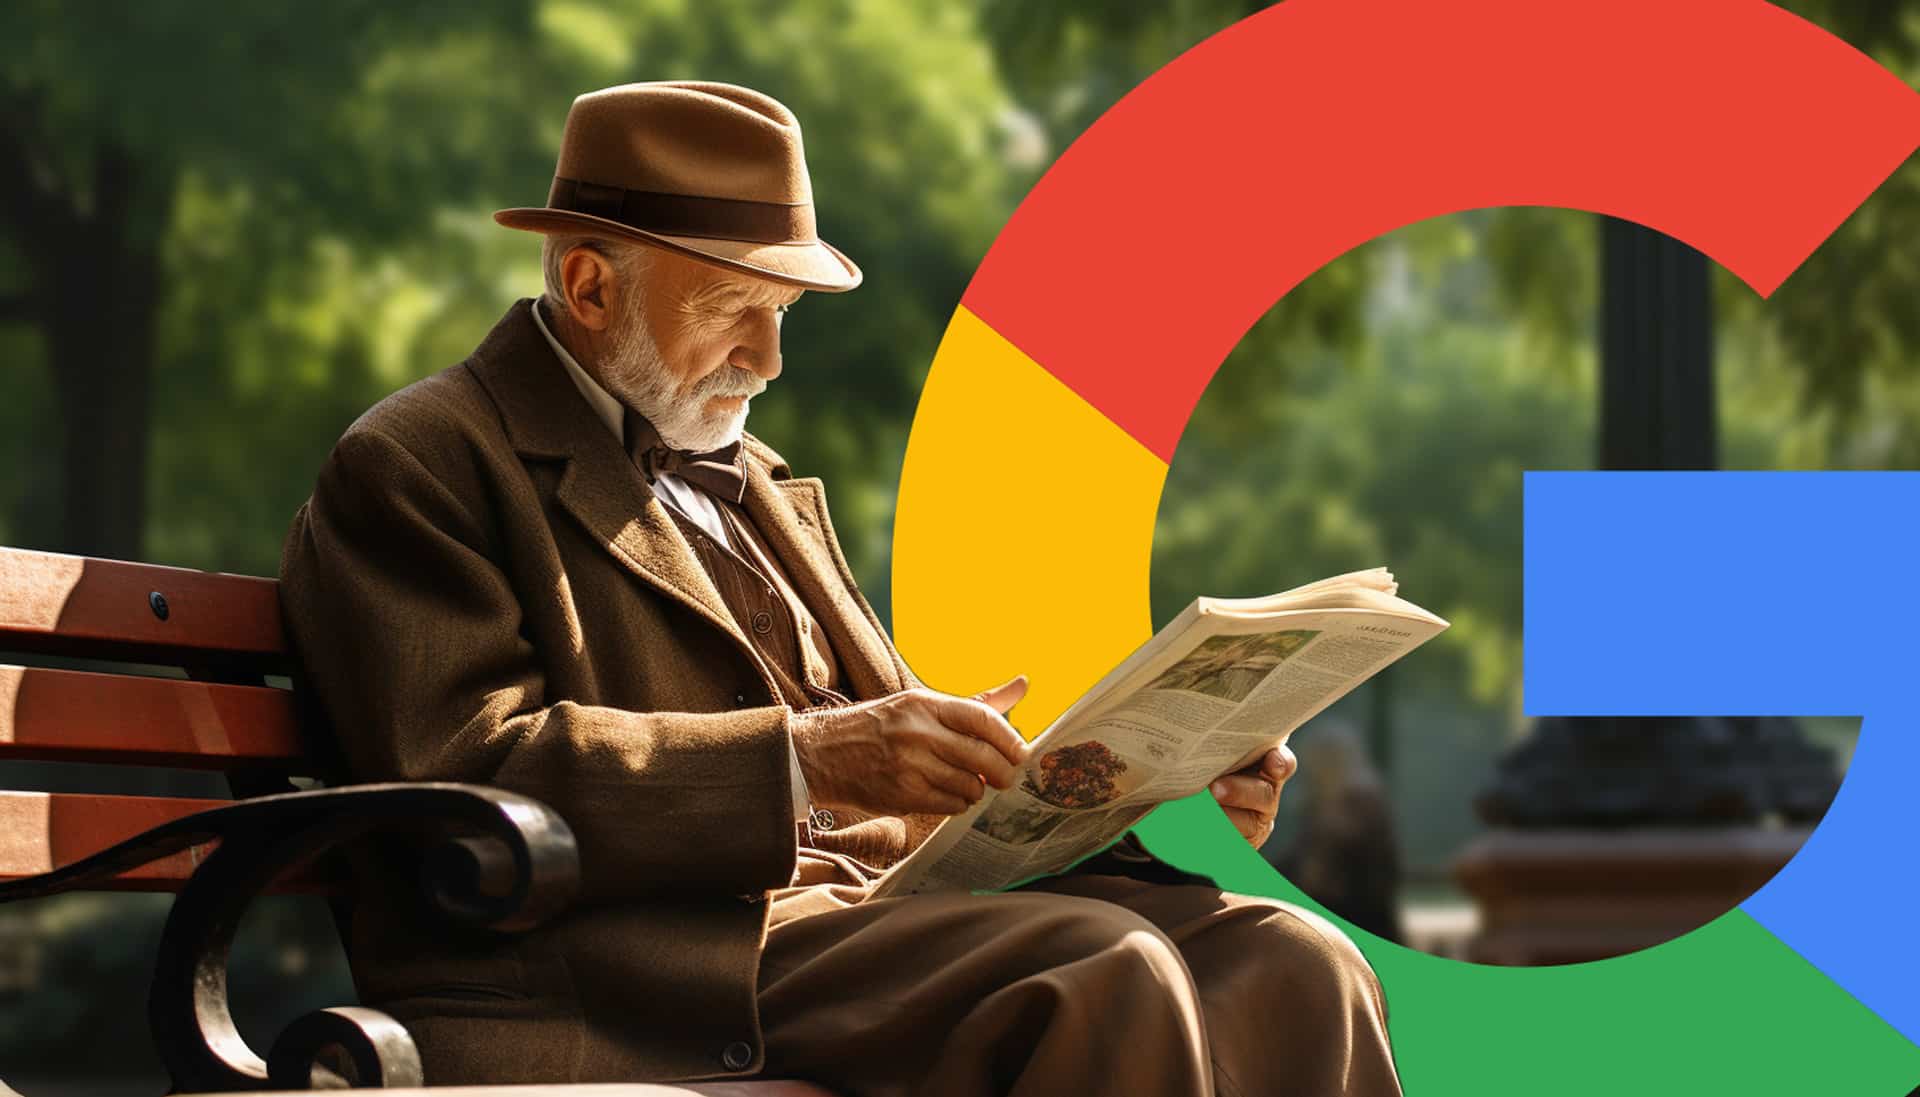 Google confirms bug with Google News impacting publisher traffic